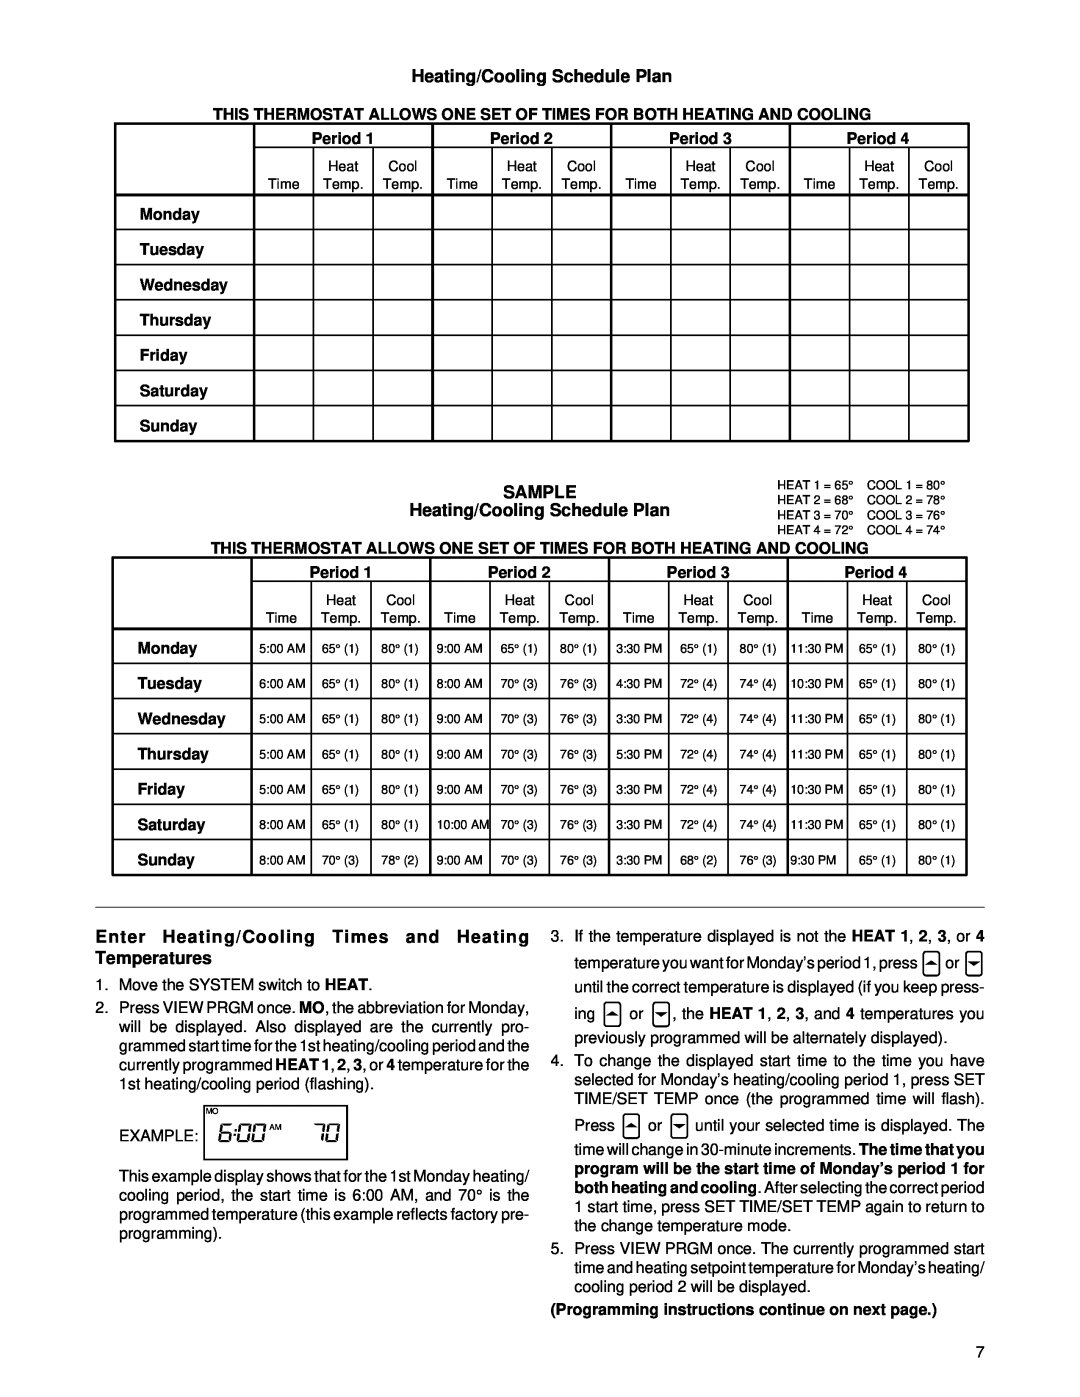 White Rodgers 1F84-51 specifications SAMPLE Heating/Cooling Schedule Plan 